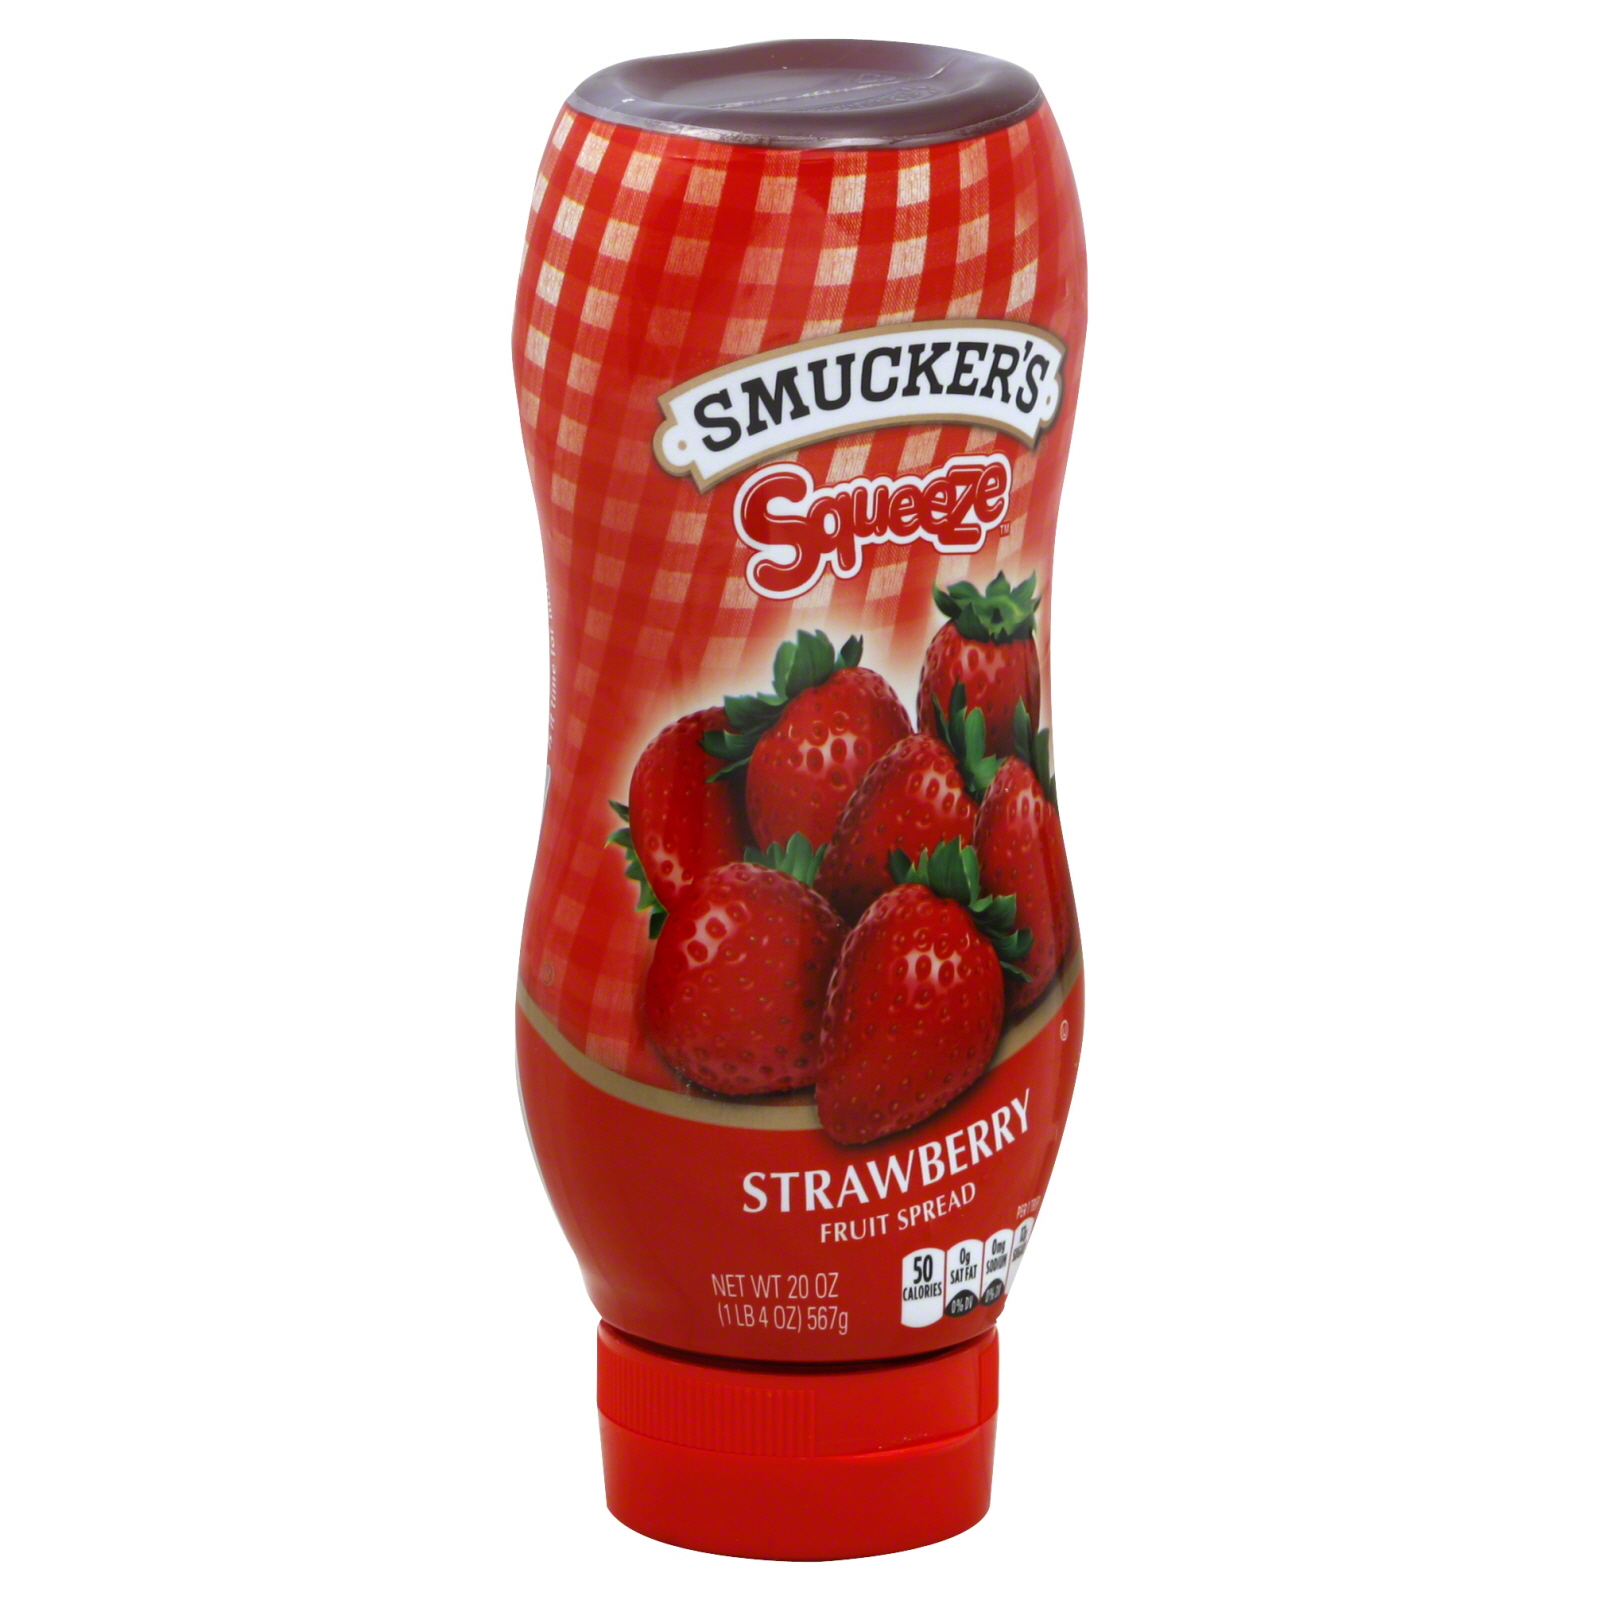 Smuckers Squeeze Fruit Spread, Strawberry, 20 oz (1 lb 4 oz) 567 g